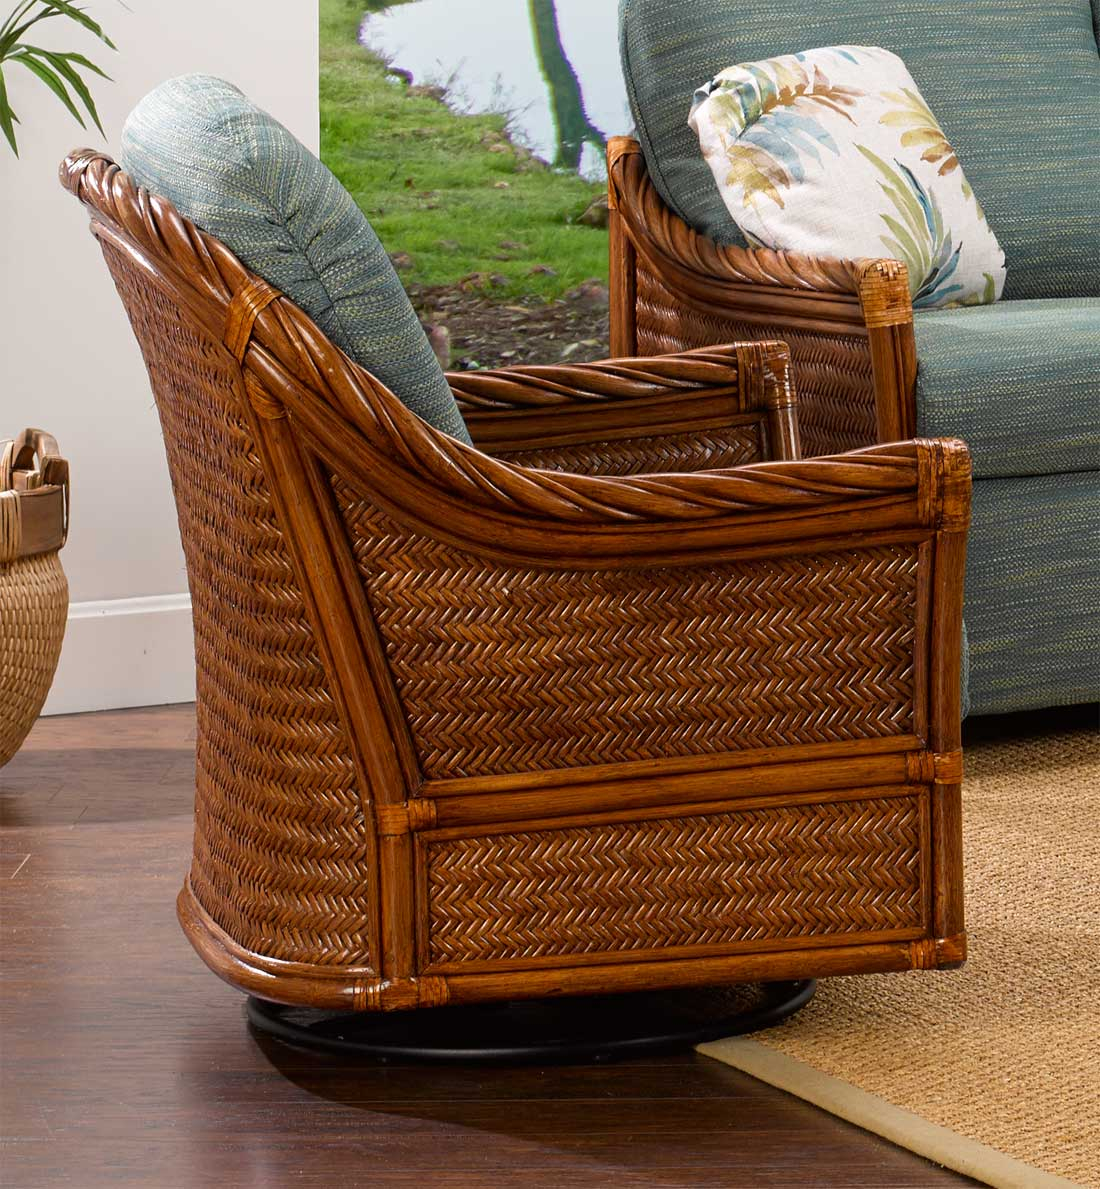 South Shore Natural Rattan Swivel Glider Chair (Custom Finishes Available)